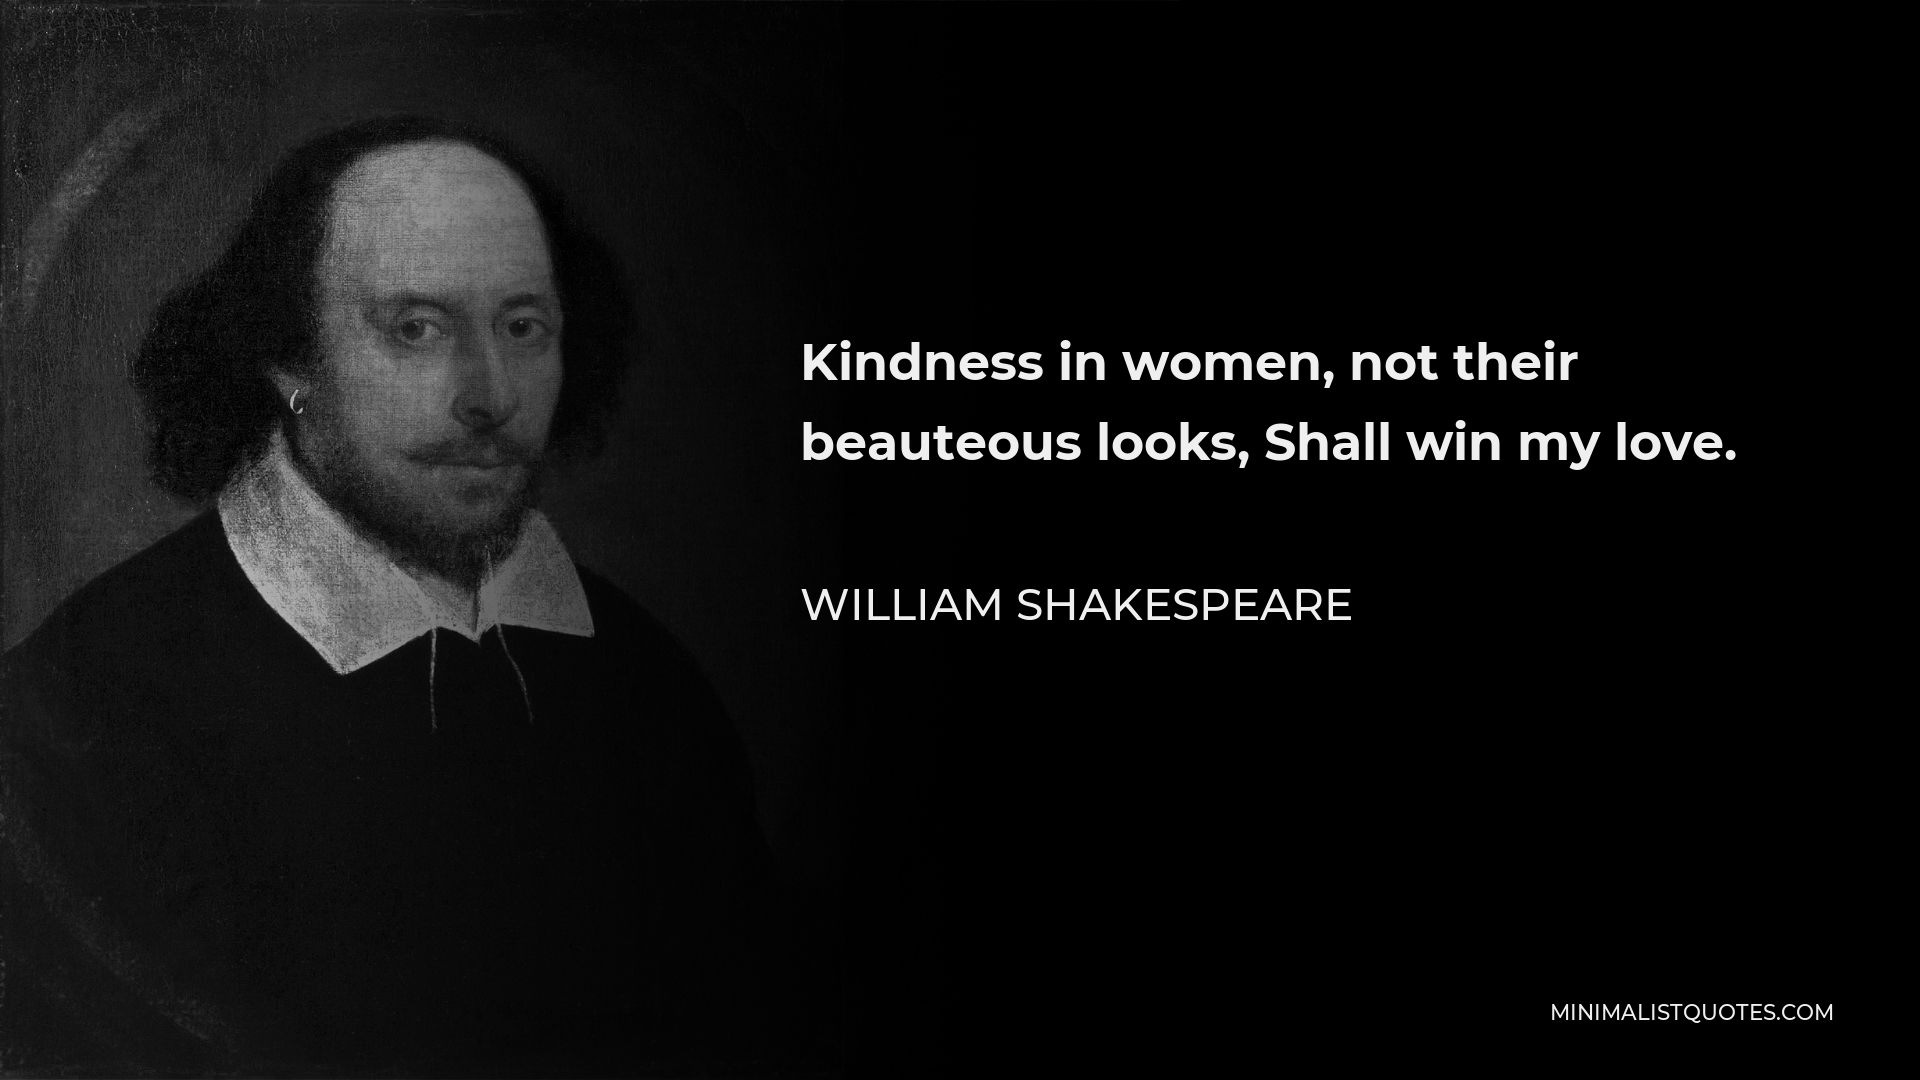 William Shakespeare Quote - Kindness in women, not their beauteous looks, Shall win my love.